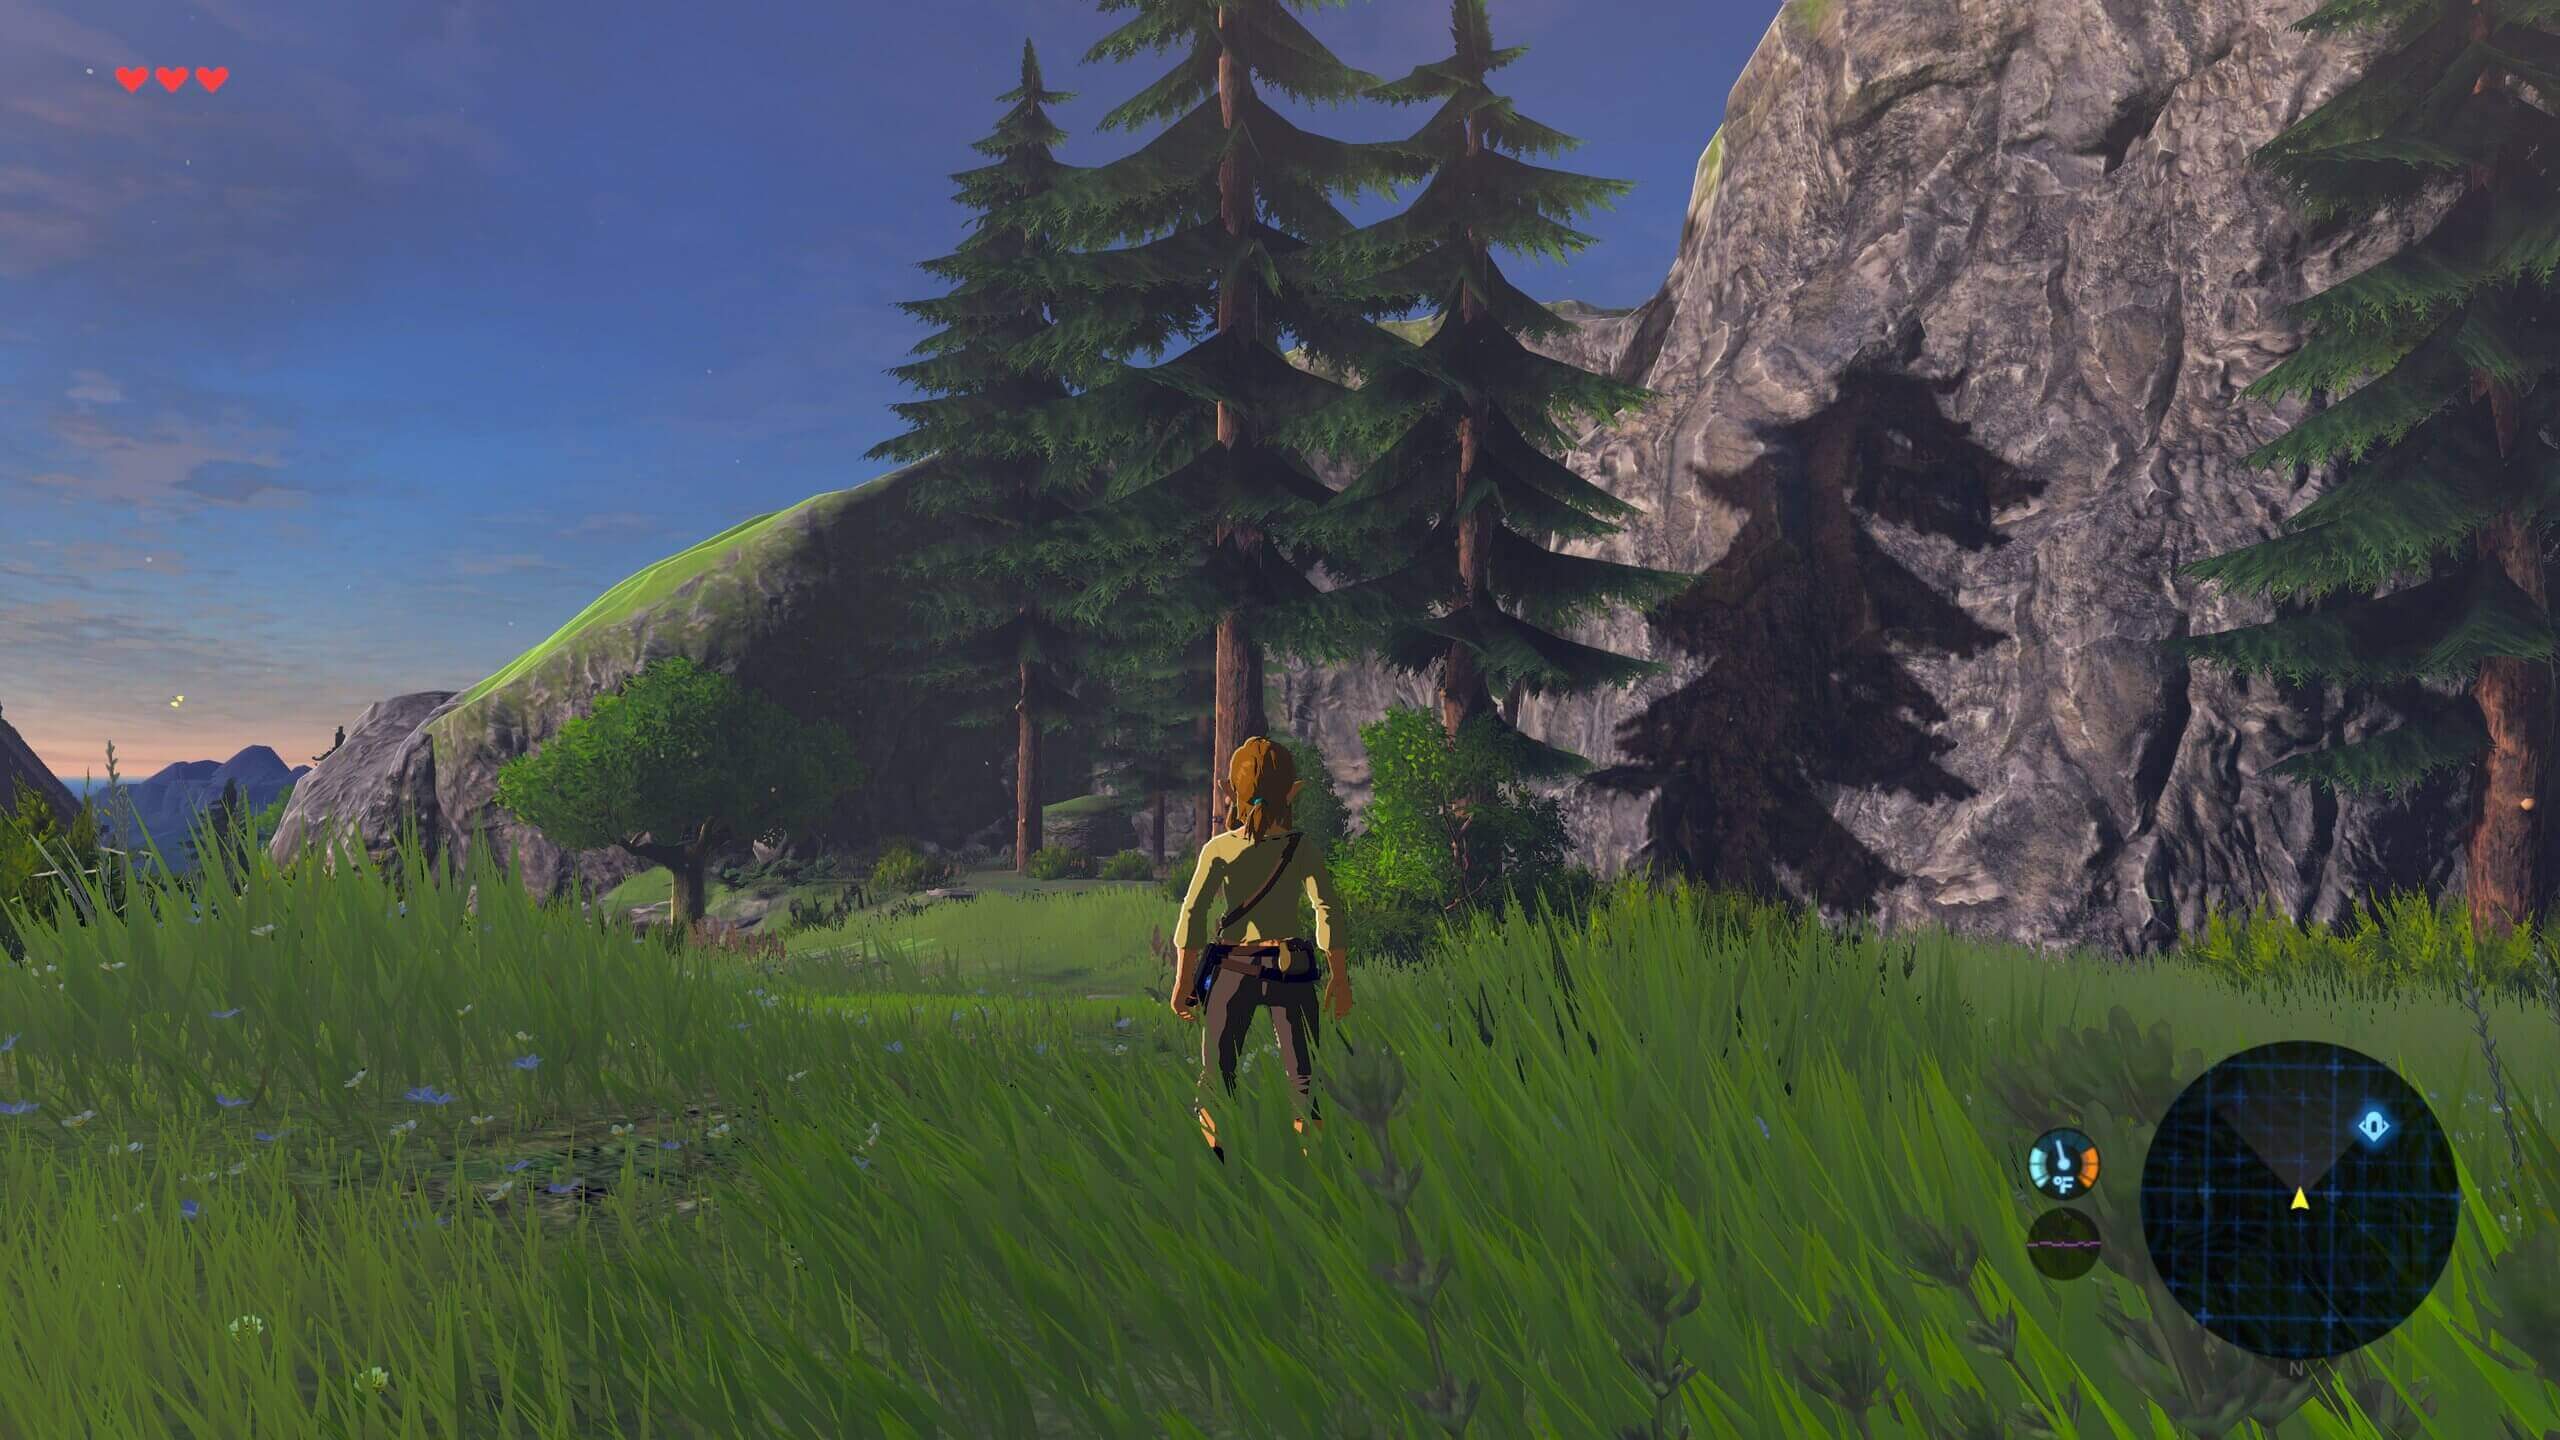 The Switch 2 demonstration reportedly featured BOTW running at 4K 60 fps with DLSS